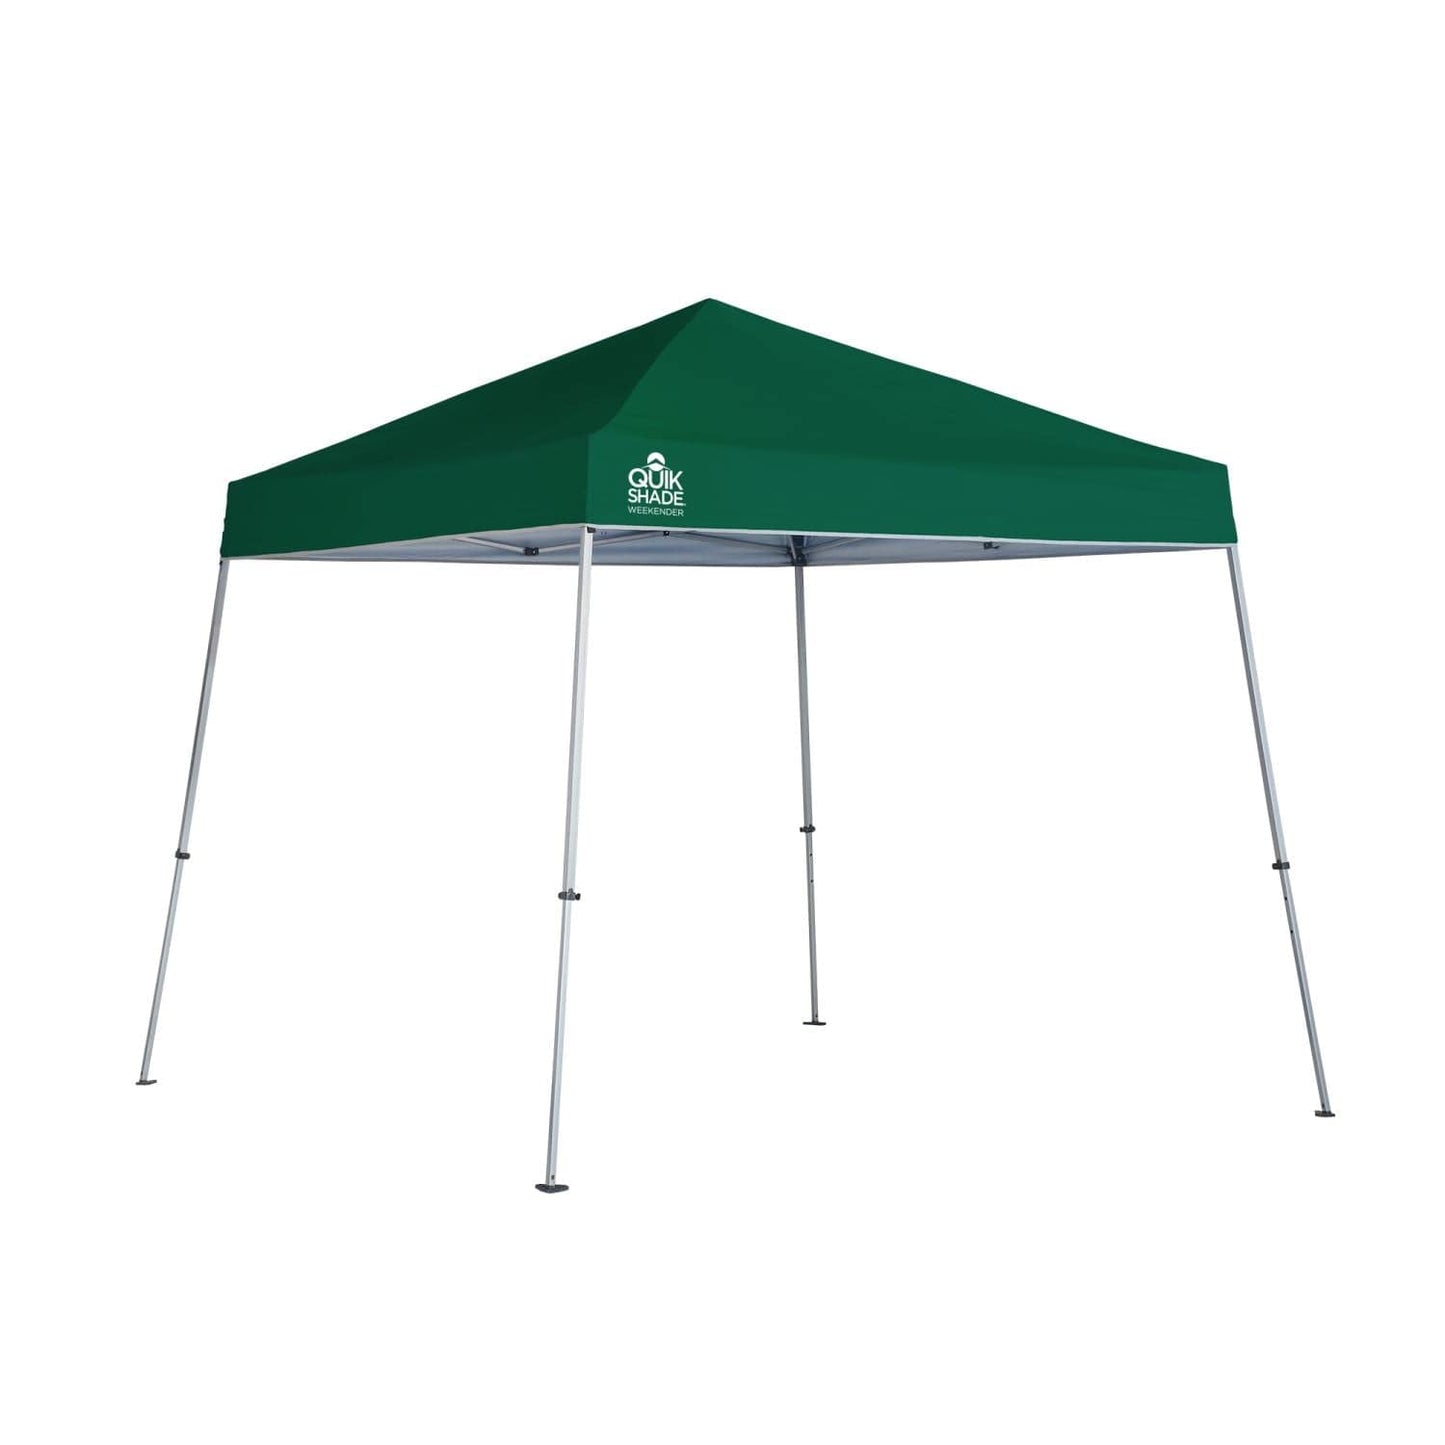 The Fulfiller Pop Up Canopies Quik Shade | Weekender Elite Weekender Elite WE64 10' x 10' Slant Leg Canopy - Green 157374DS